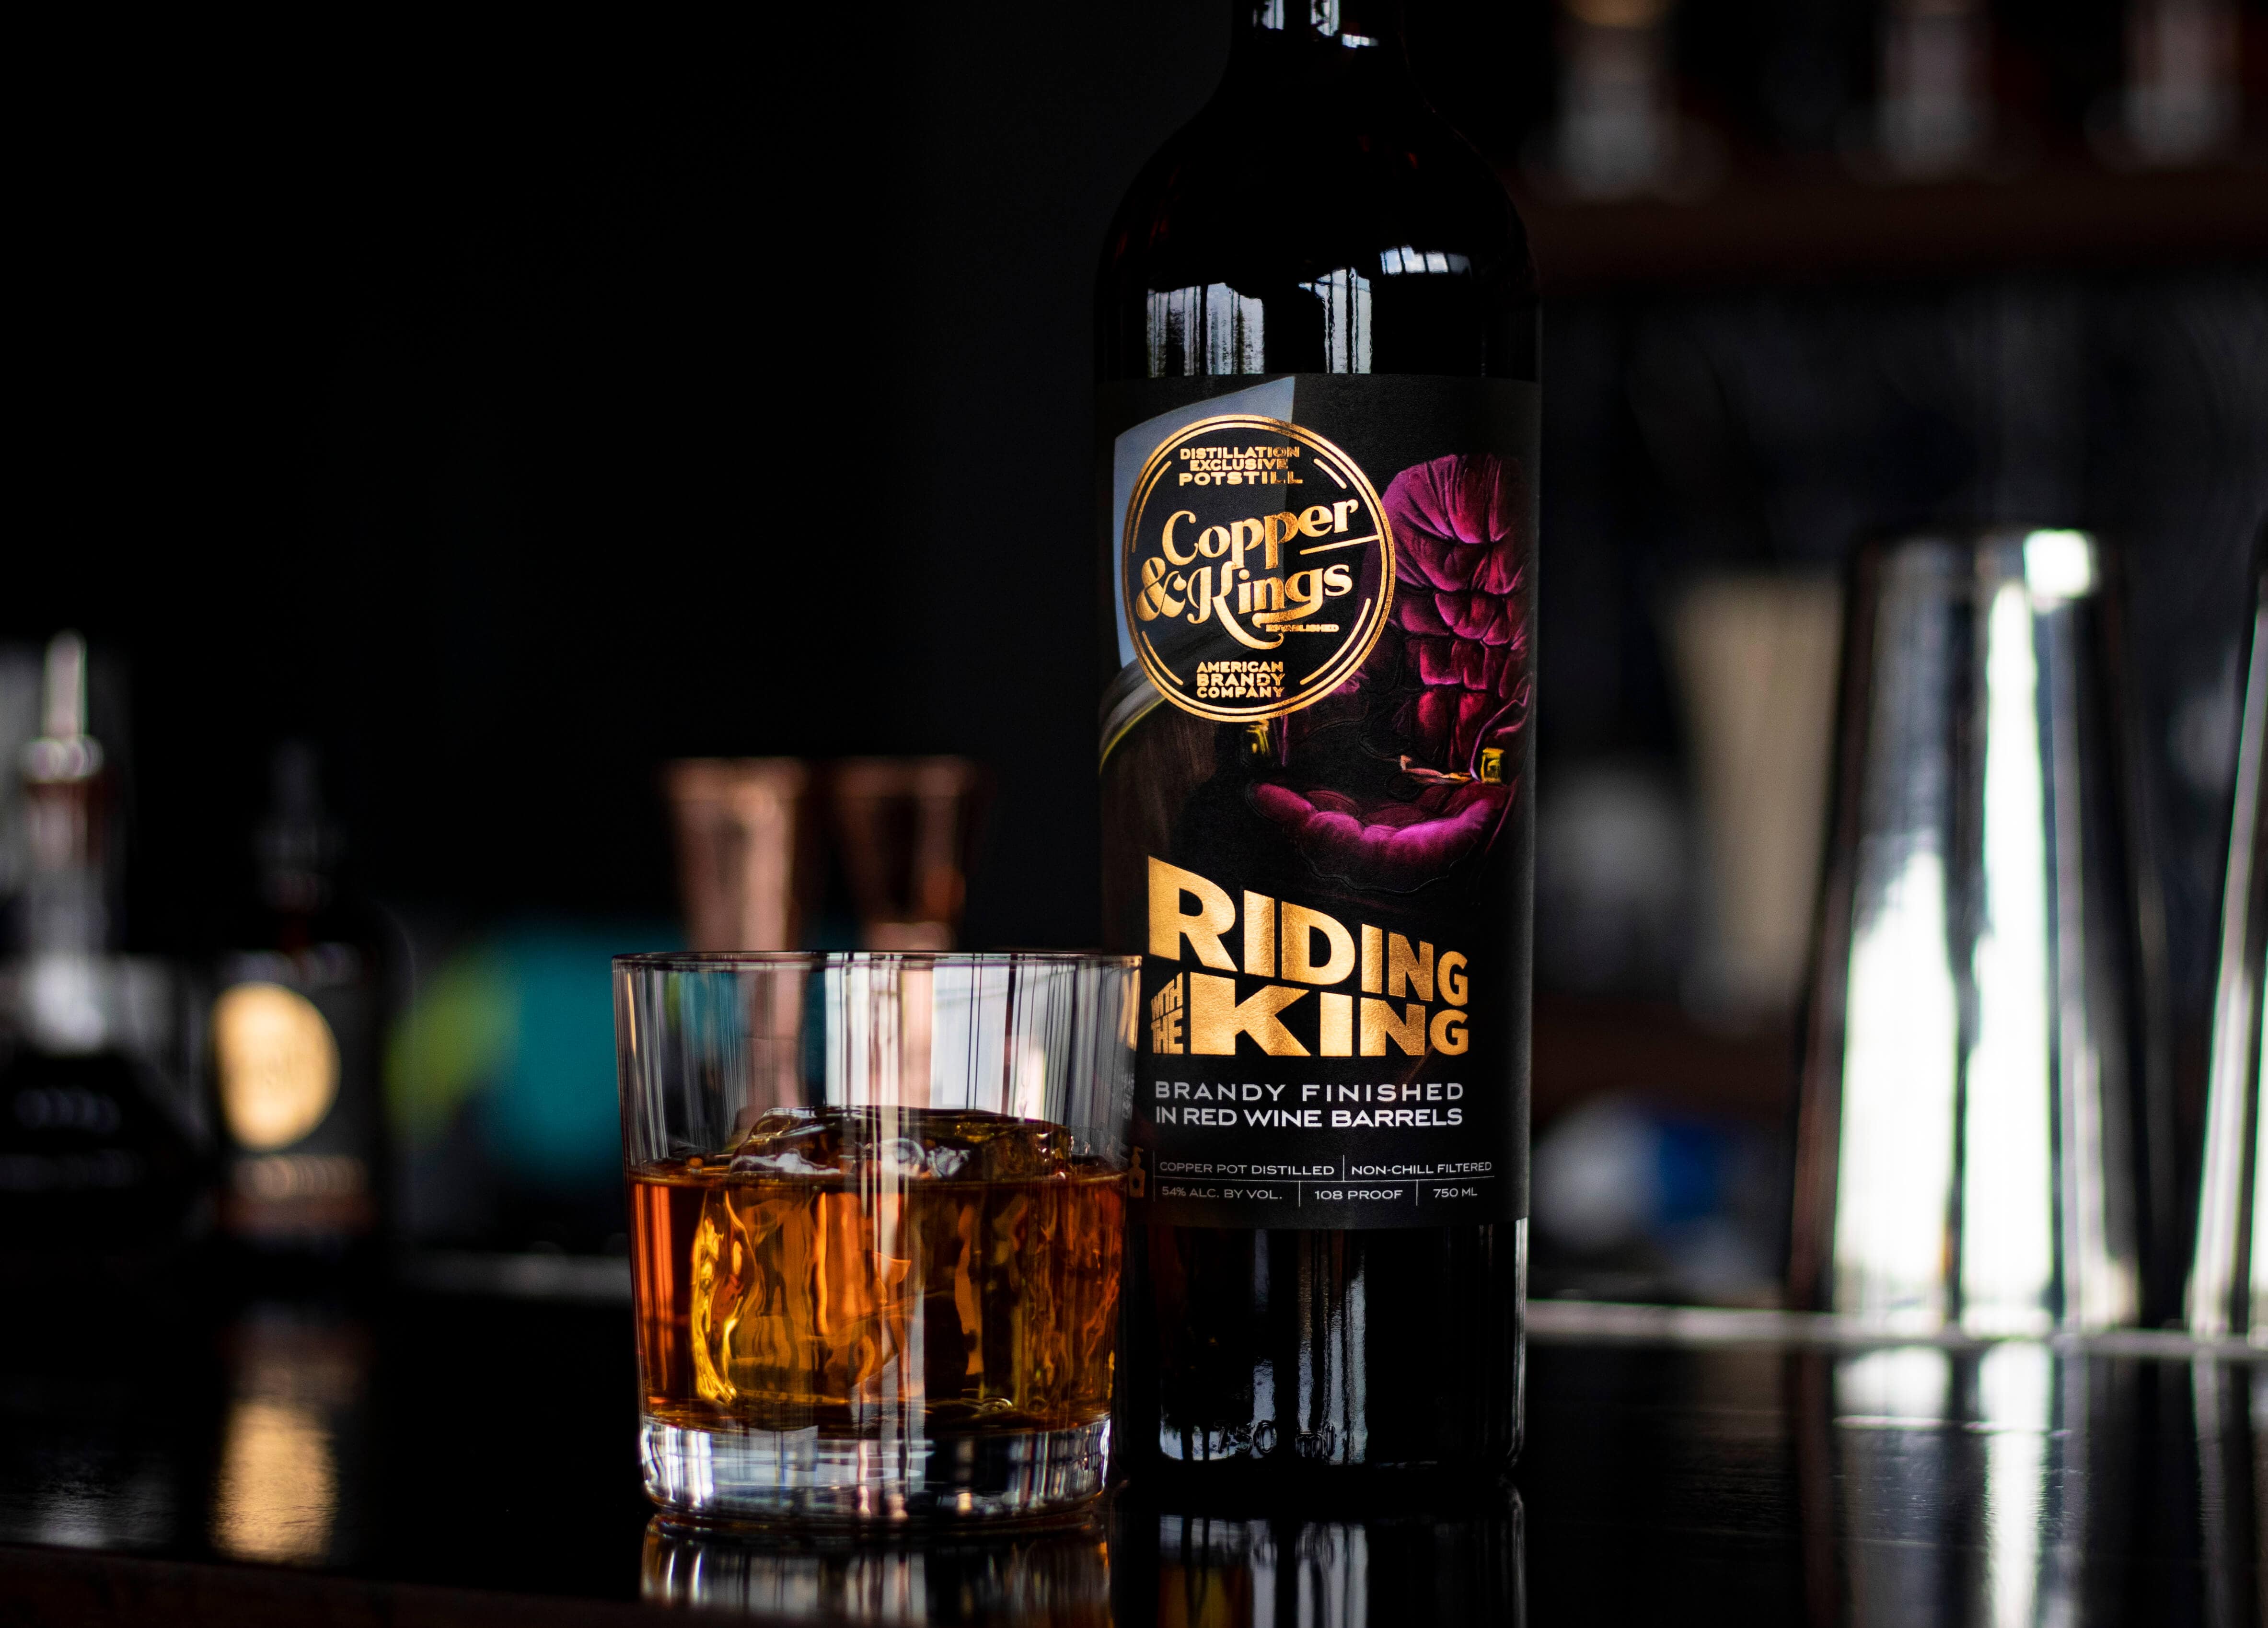 Riding with the King 2 - Copper & Kings Launches Riding With The King Limited Release American Brandy Aged in King Estate Red Wine Barrels 